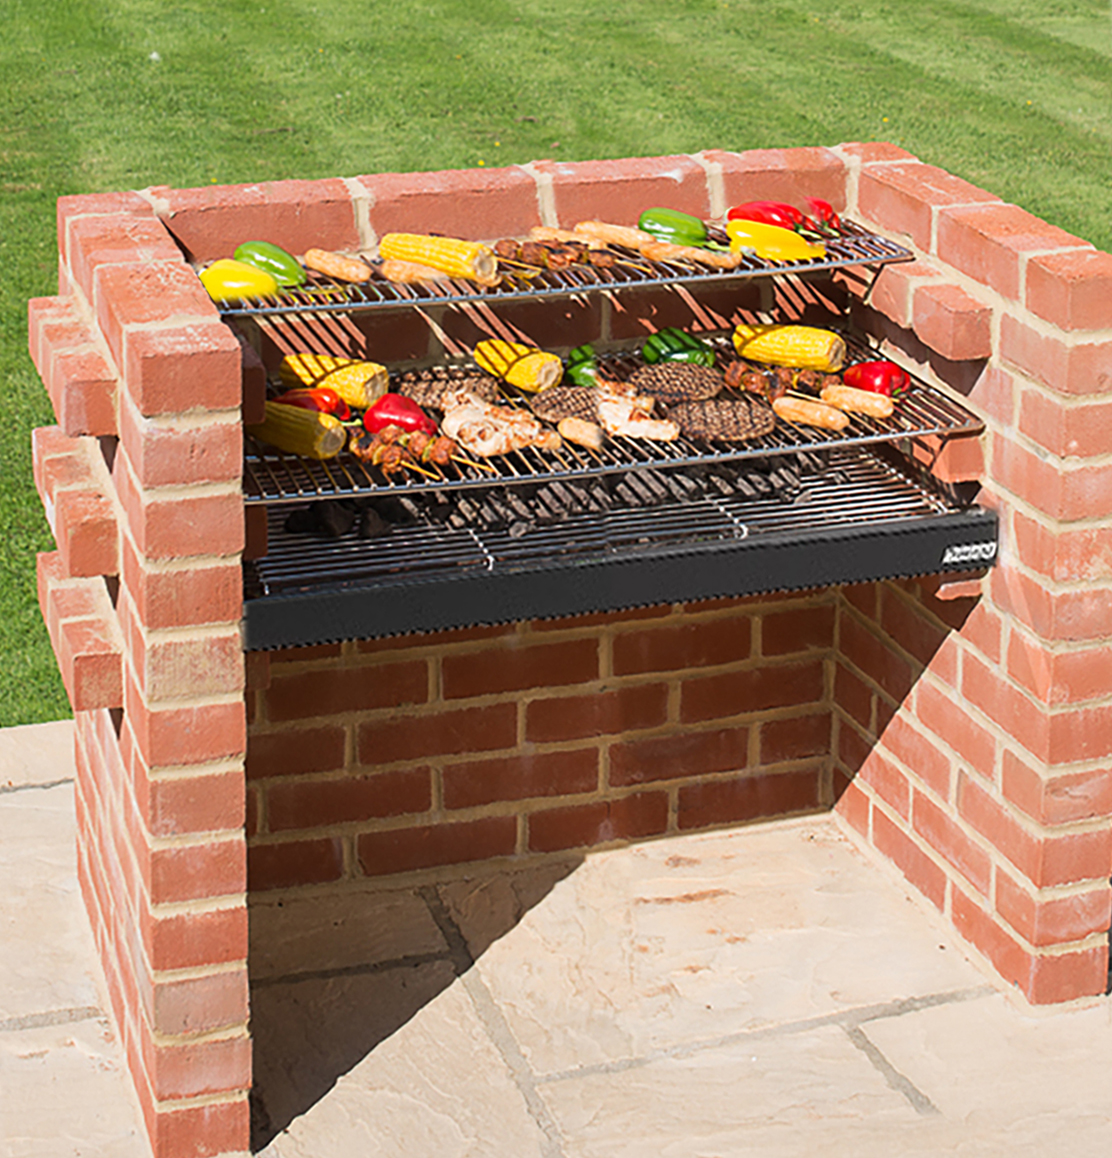 Large Brick BBQ Kit 90 x 39 cms (4 BRICKS WIDE) :: With Warming Rack BKB331 What Is A Grill Brick Made Of